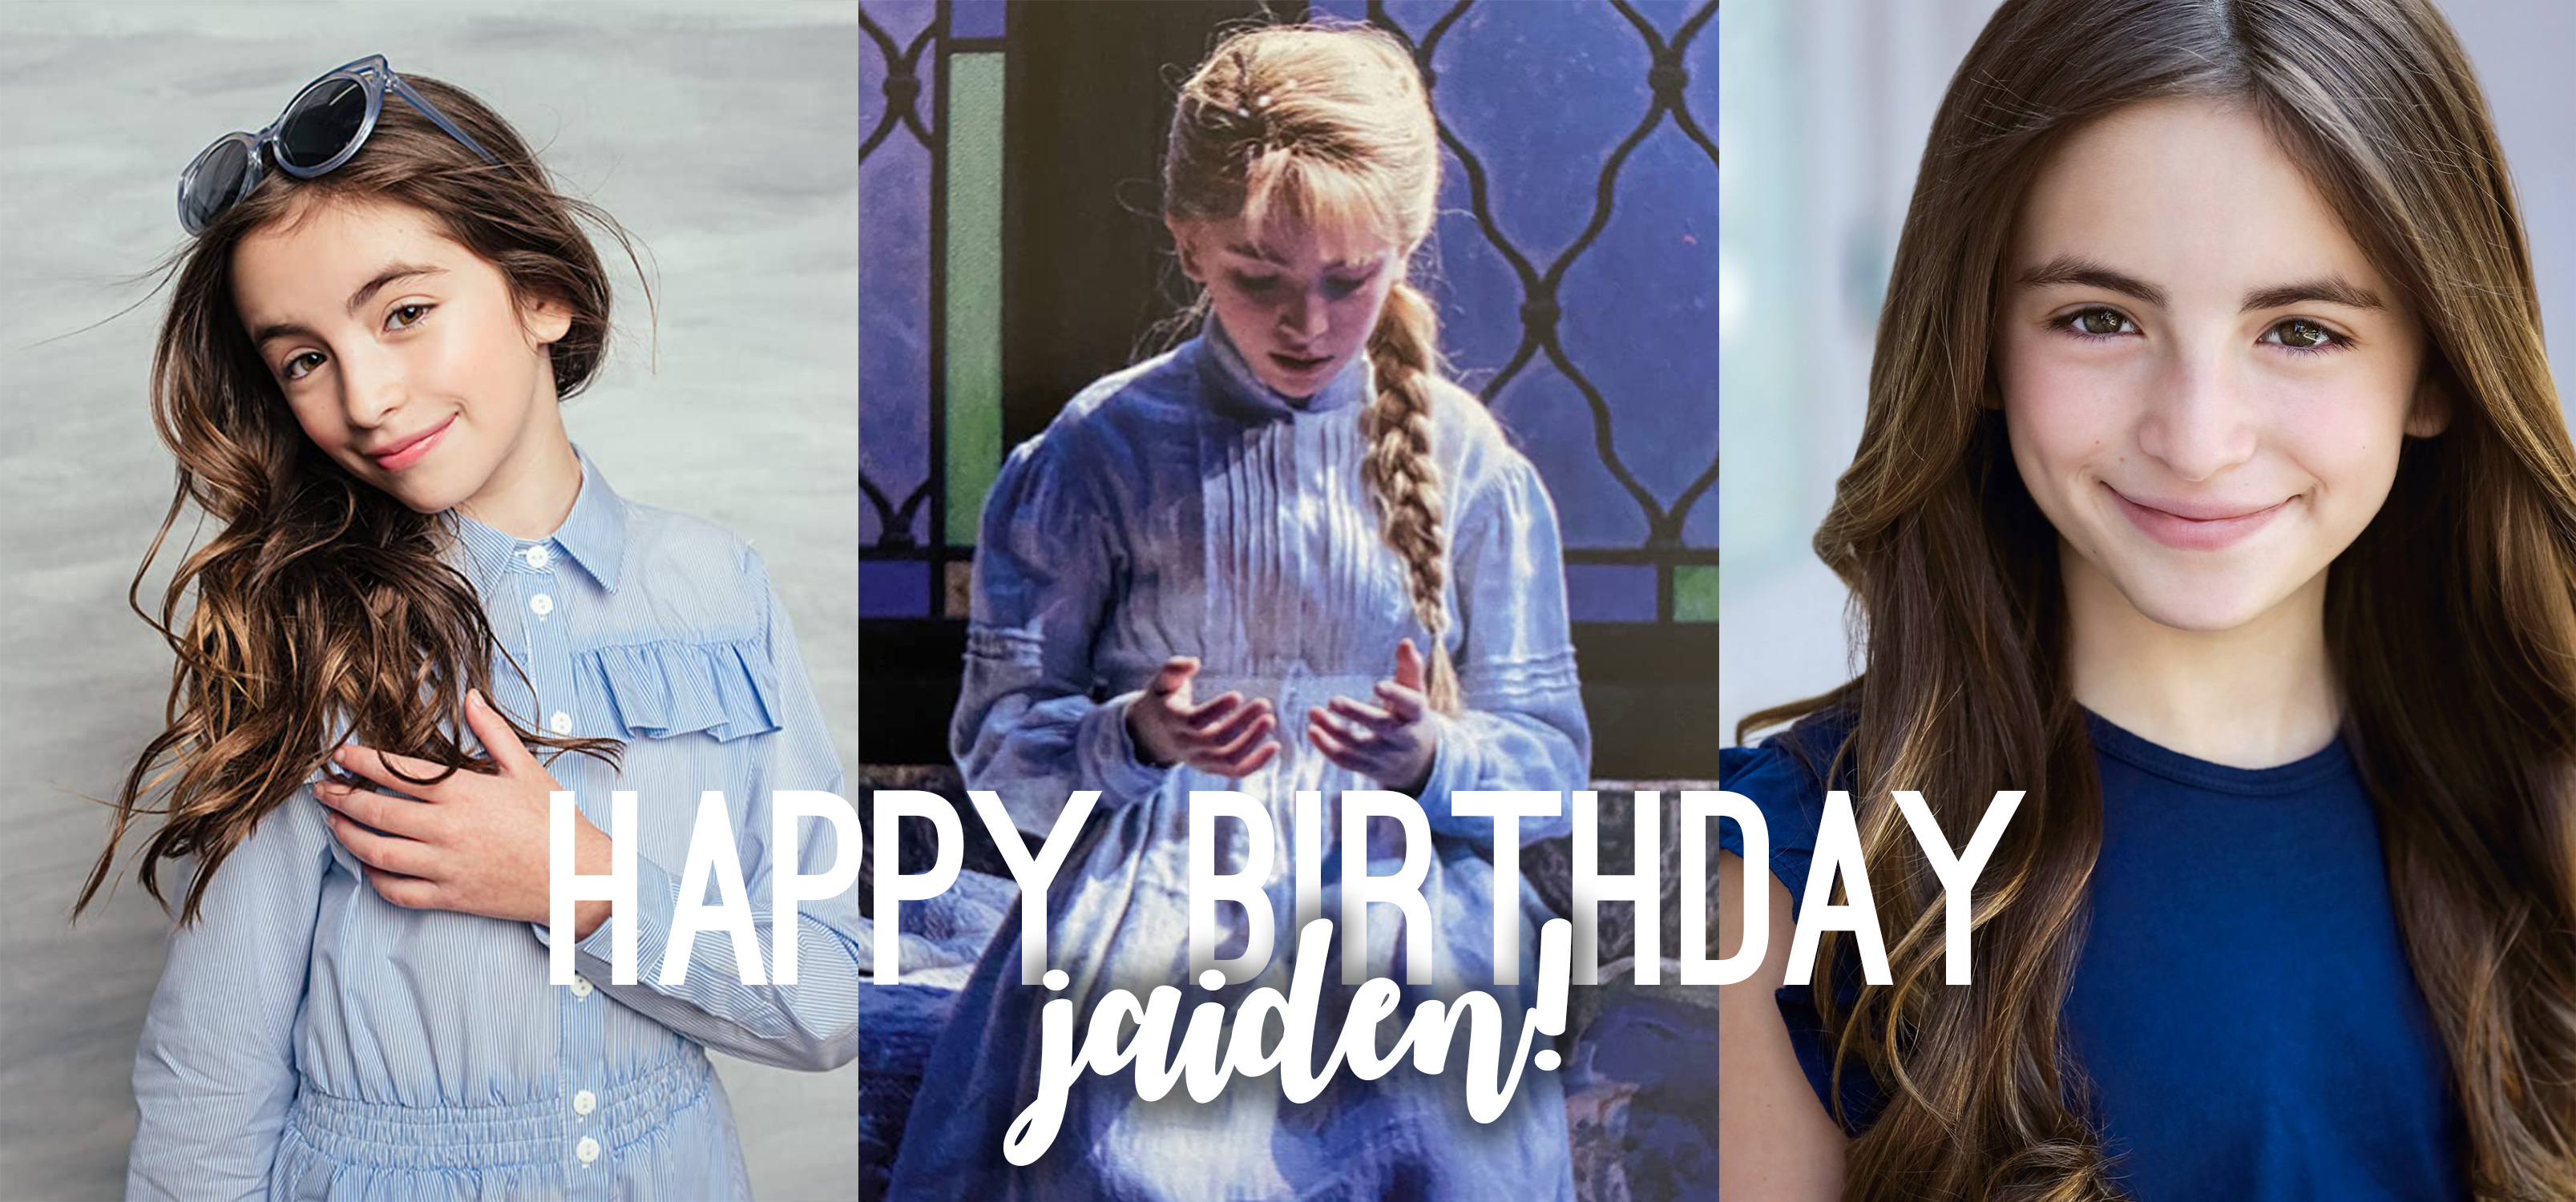 Happy Birthday to Jaiden Klein, Reed Shannon To Perform in “Virtual Back 2 School Bash,” and more!